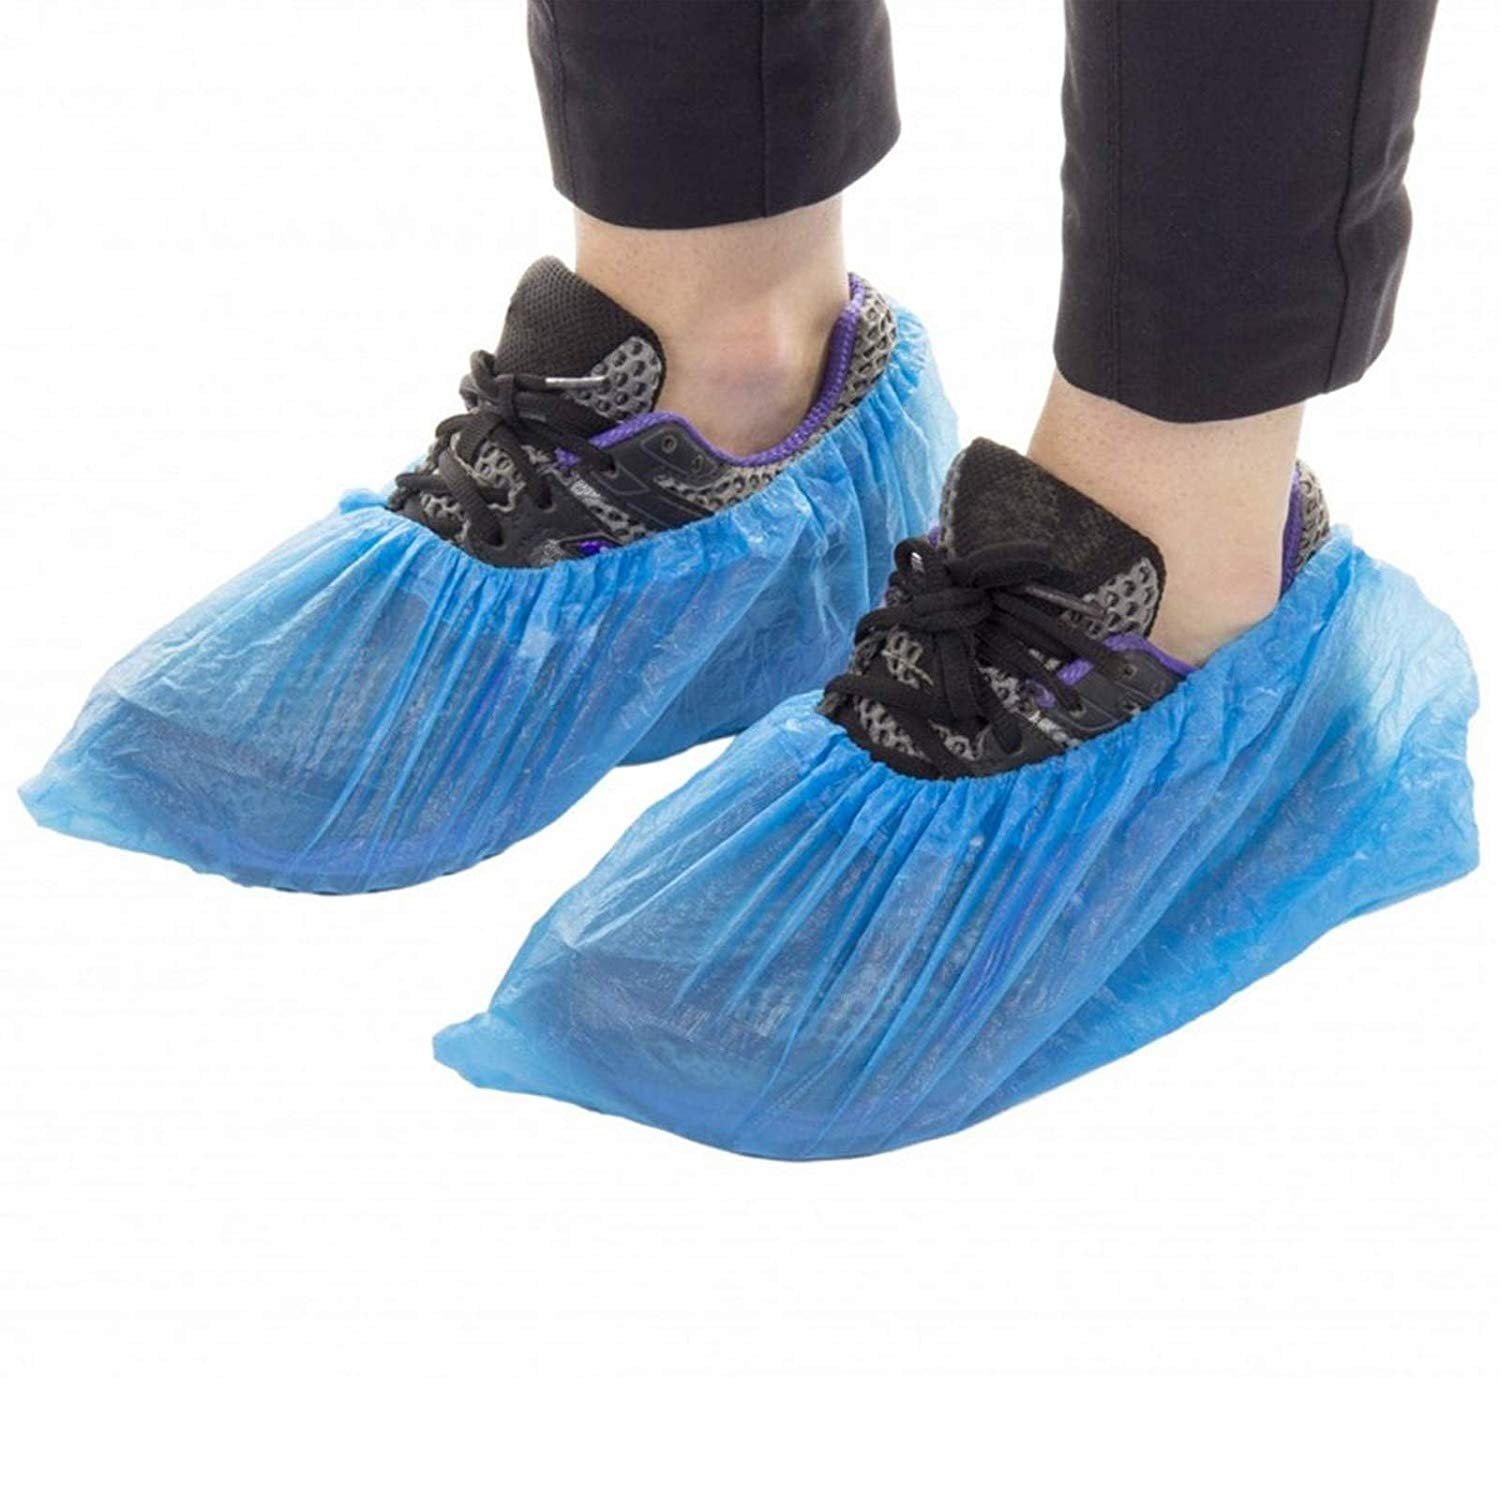 200PCS Disposable Waterproof Boot Cover Shoe Covers Carpet Cleaning Blue Cute 